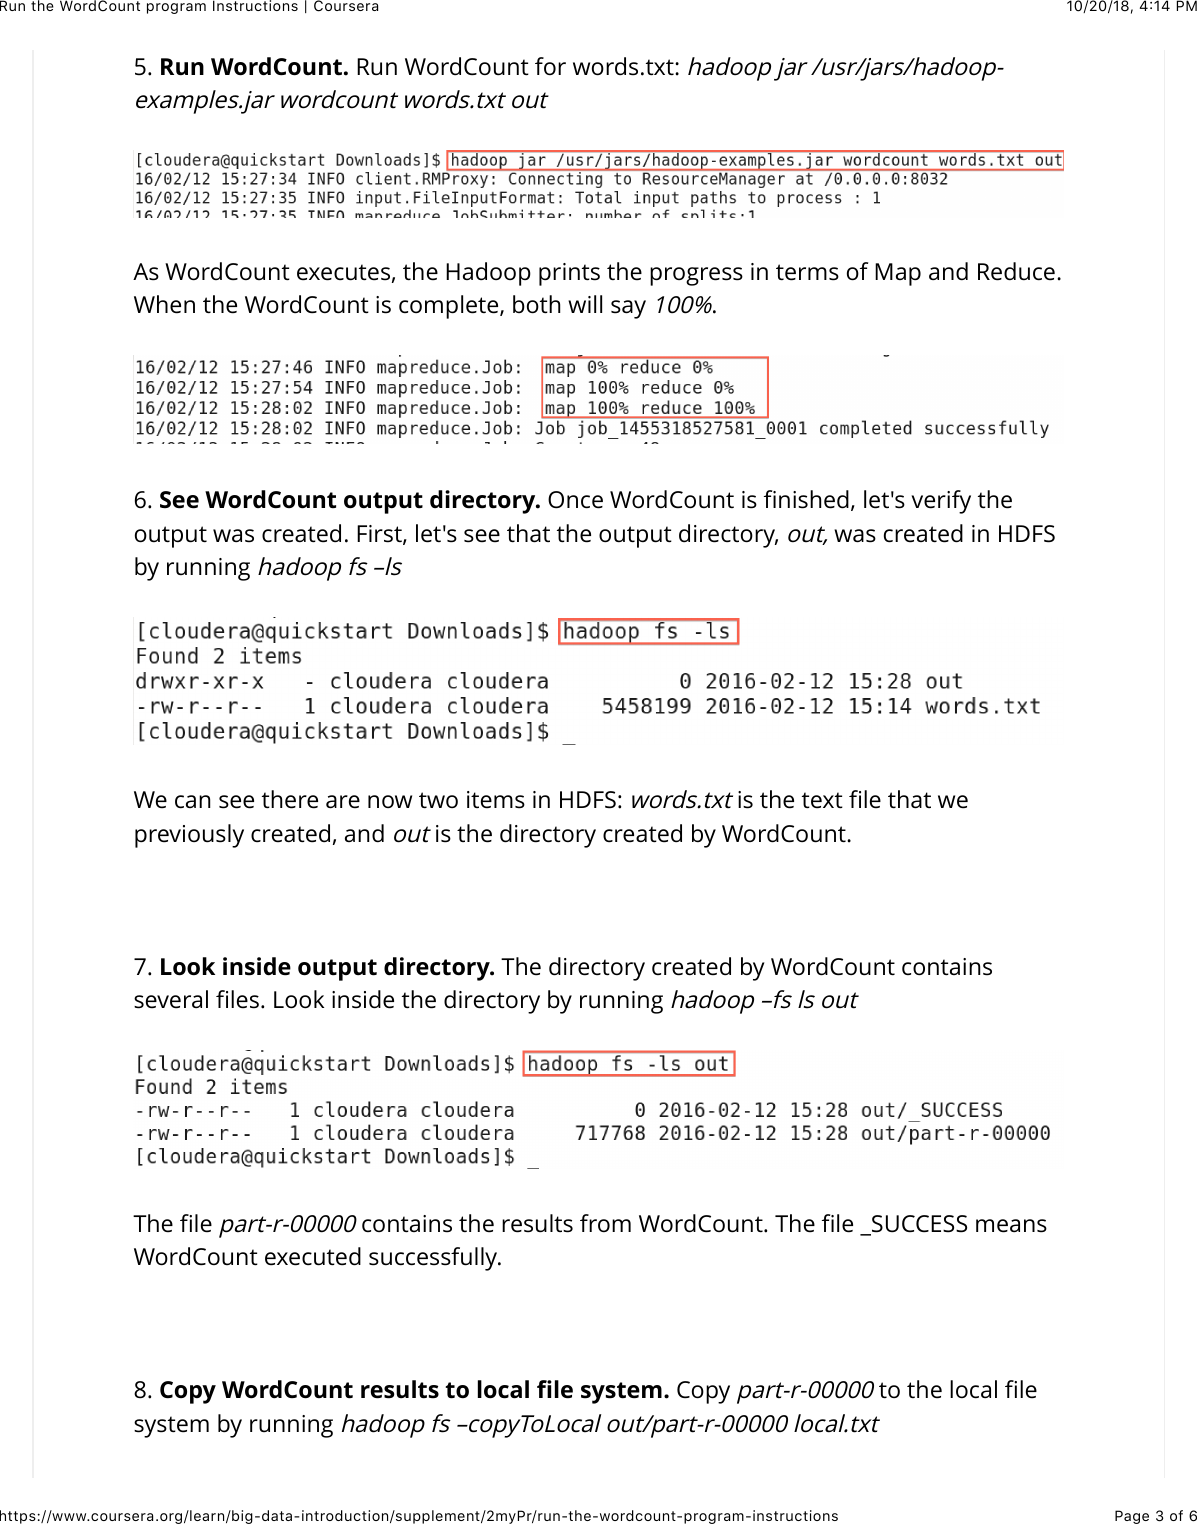 Page 3 of 6 - Run The Word Count Program Instructions | Coursera